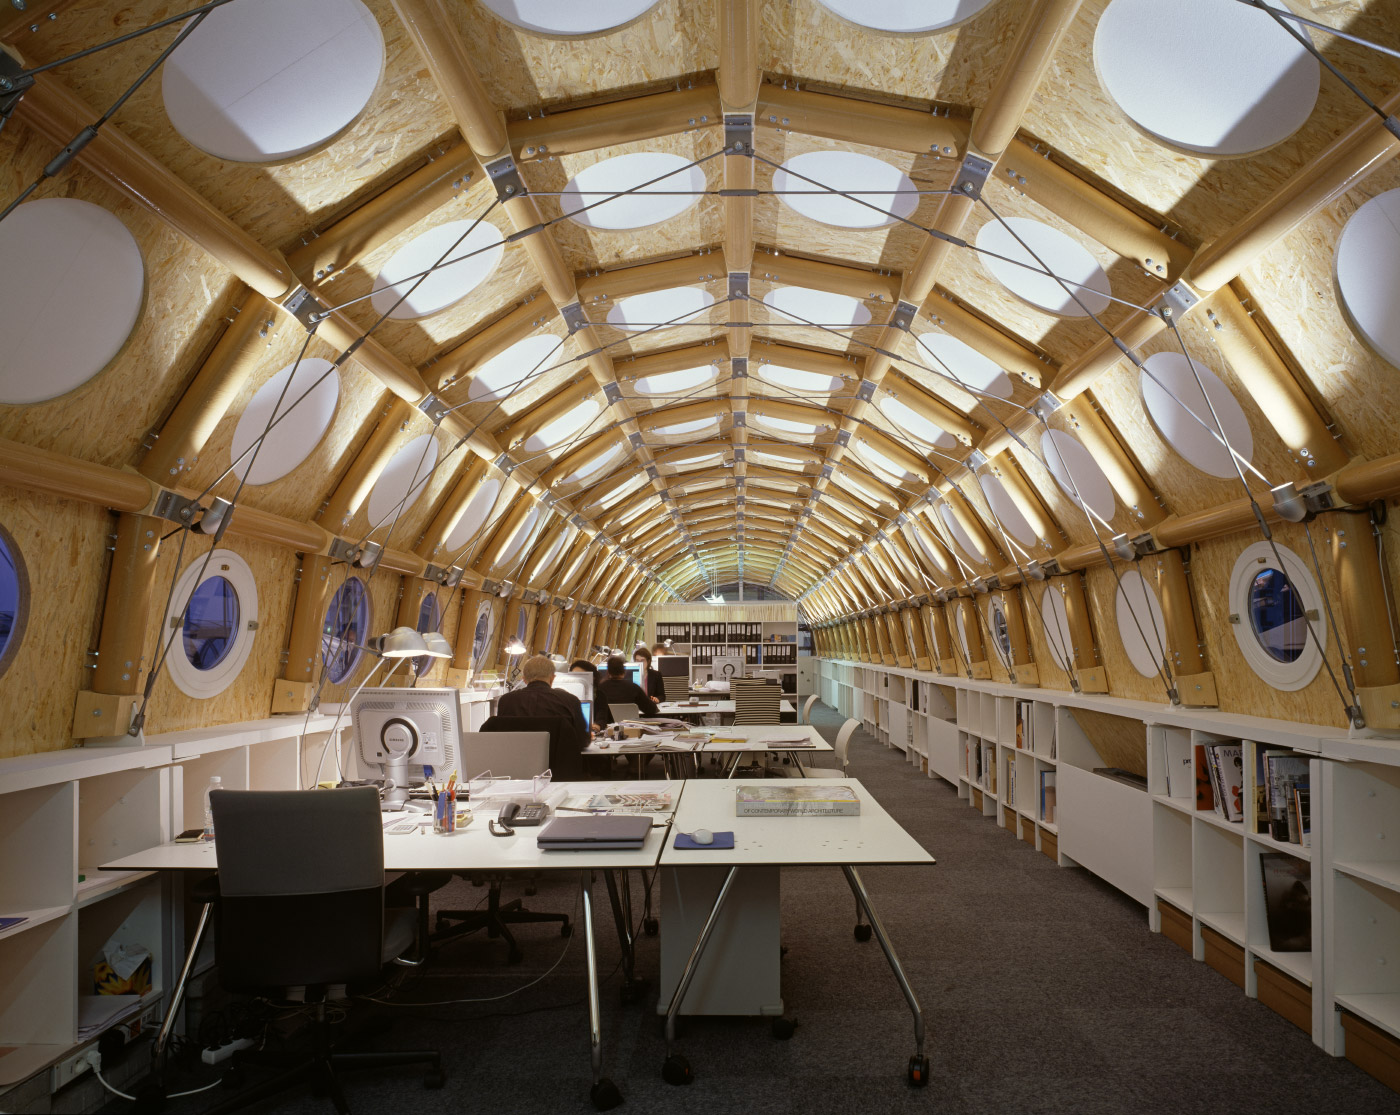 Photo of a mobile office inside of a semi-circle shaped space made of cardboard tubes